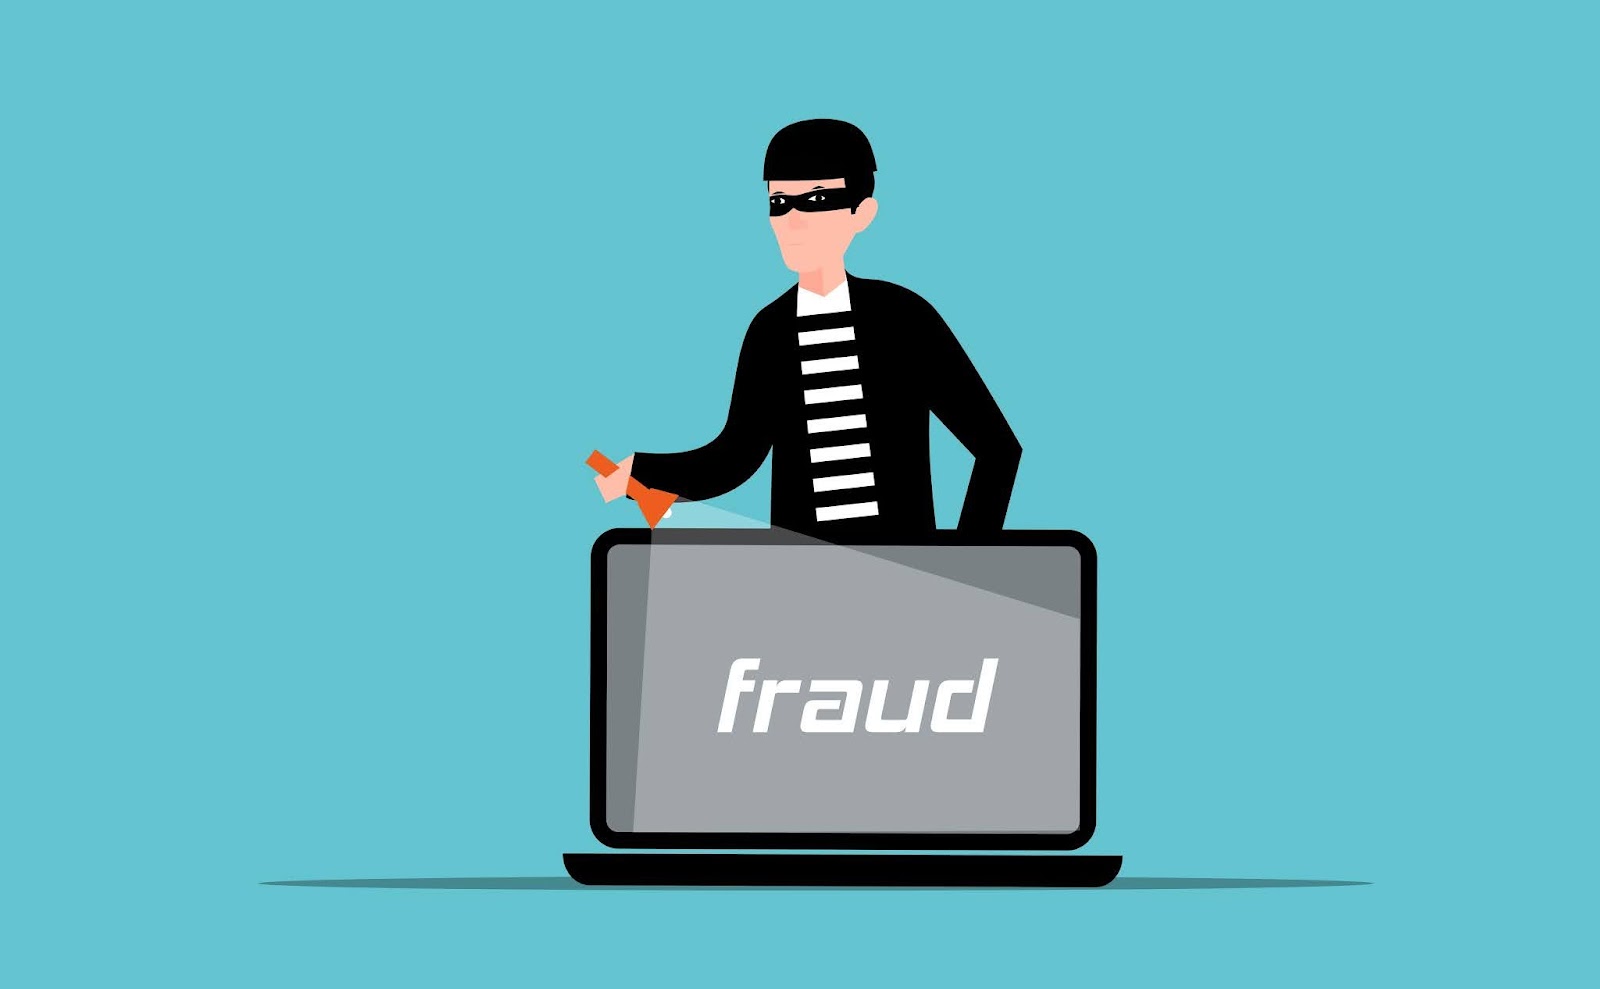 Fraud Story #57 - The client got scammed by a freelance writer!